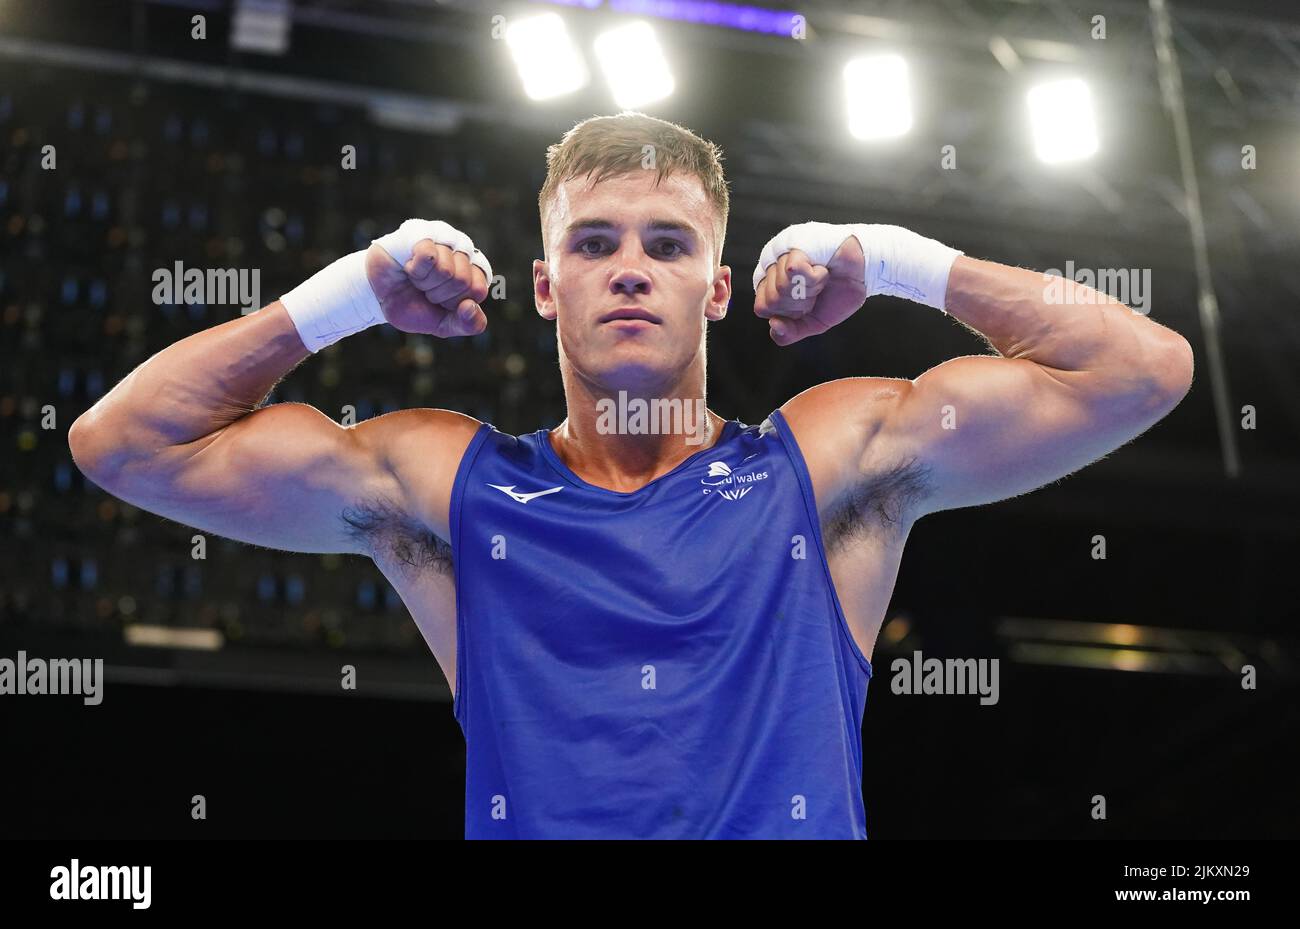 Wales' Taylor Bevan celebrates victory over Jamaica's Jerone Ennis in the Men’s Over 75kg-80kg (Light Heavyweight) - Quarter-Final 4 at The NEC on day six of the 2022 Commonwealth Games in Birmingham. Picture date: Wednesday August 3, 2022. Stock Photo